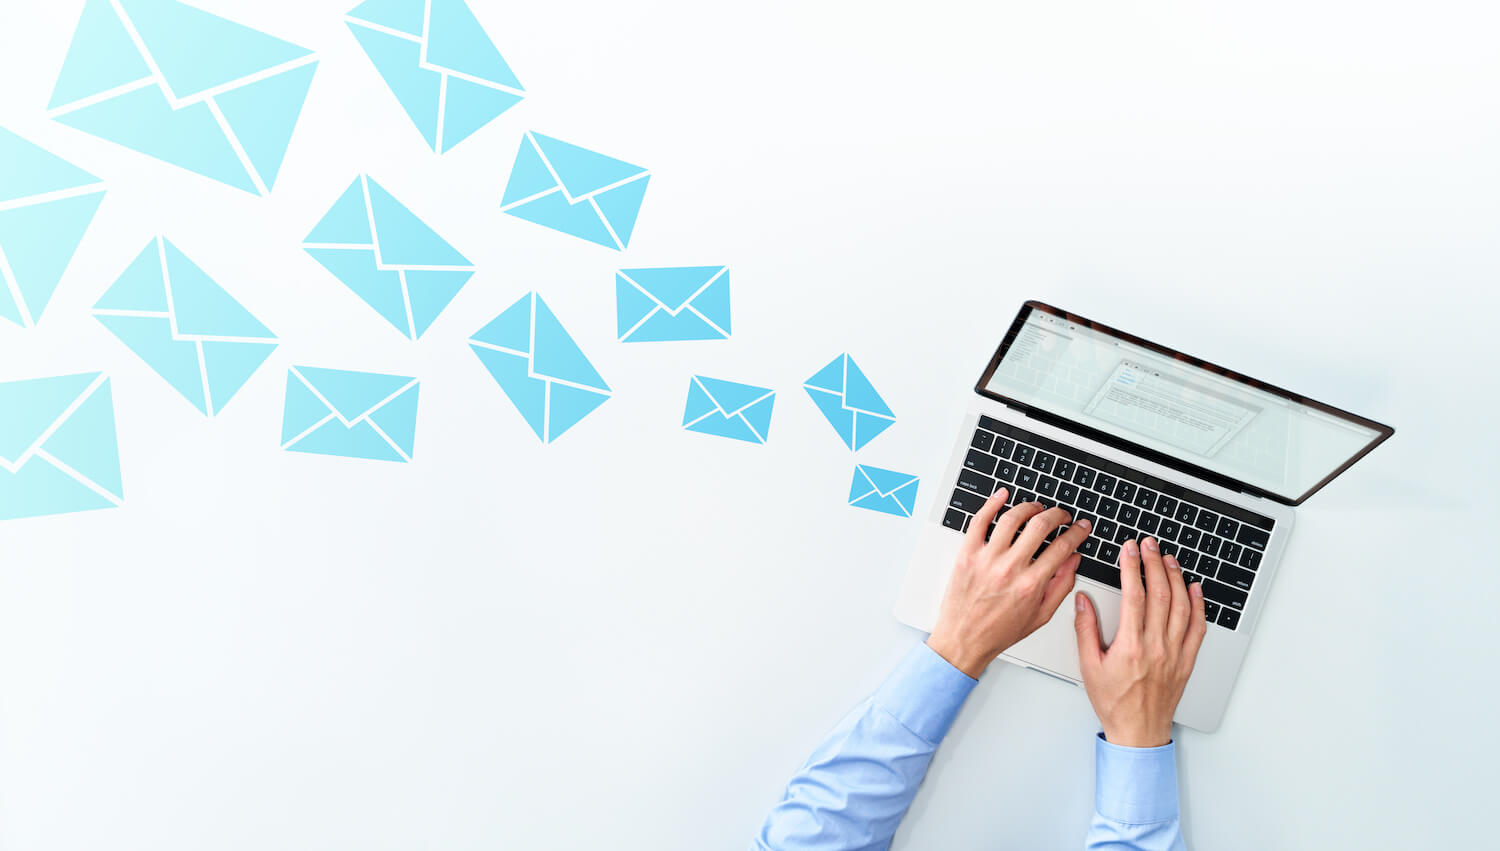 Email Organization tips for busy professionals